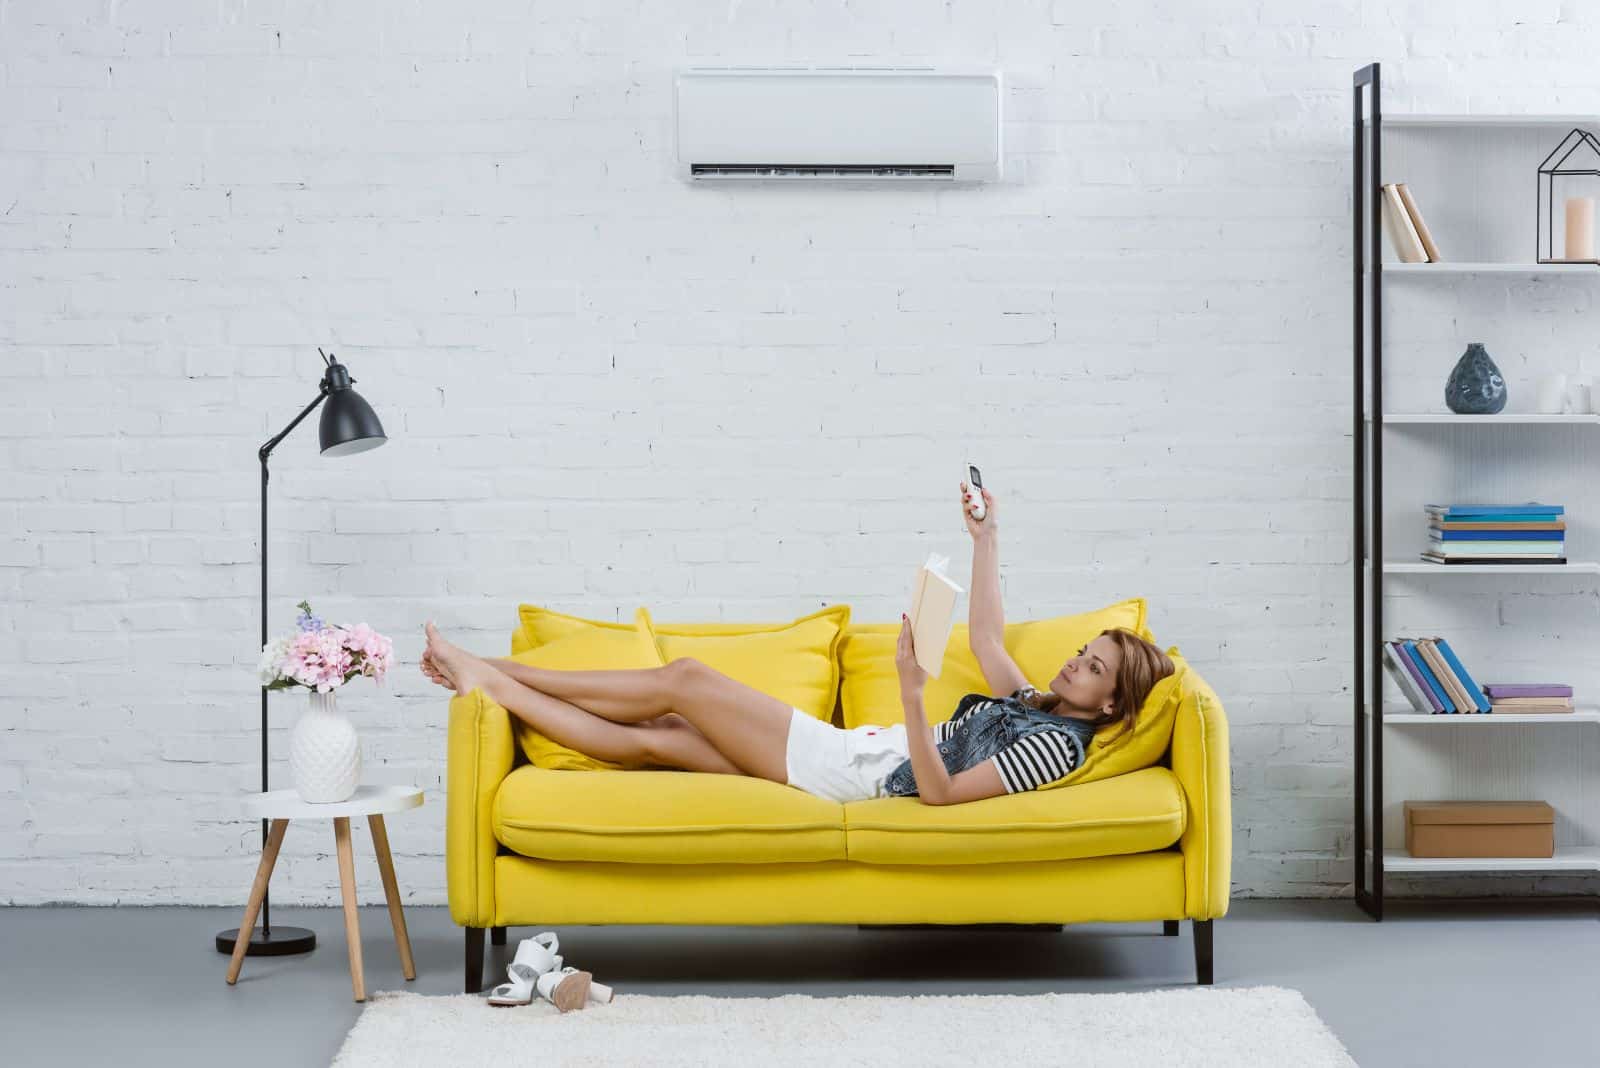 young woman lying on yellow couch enjoying air conditioning